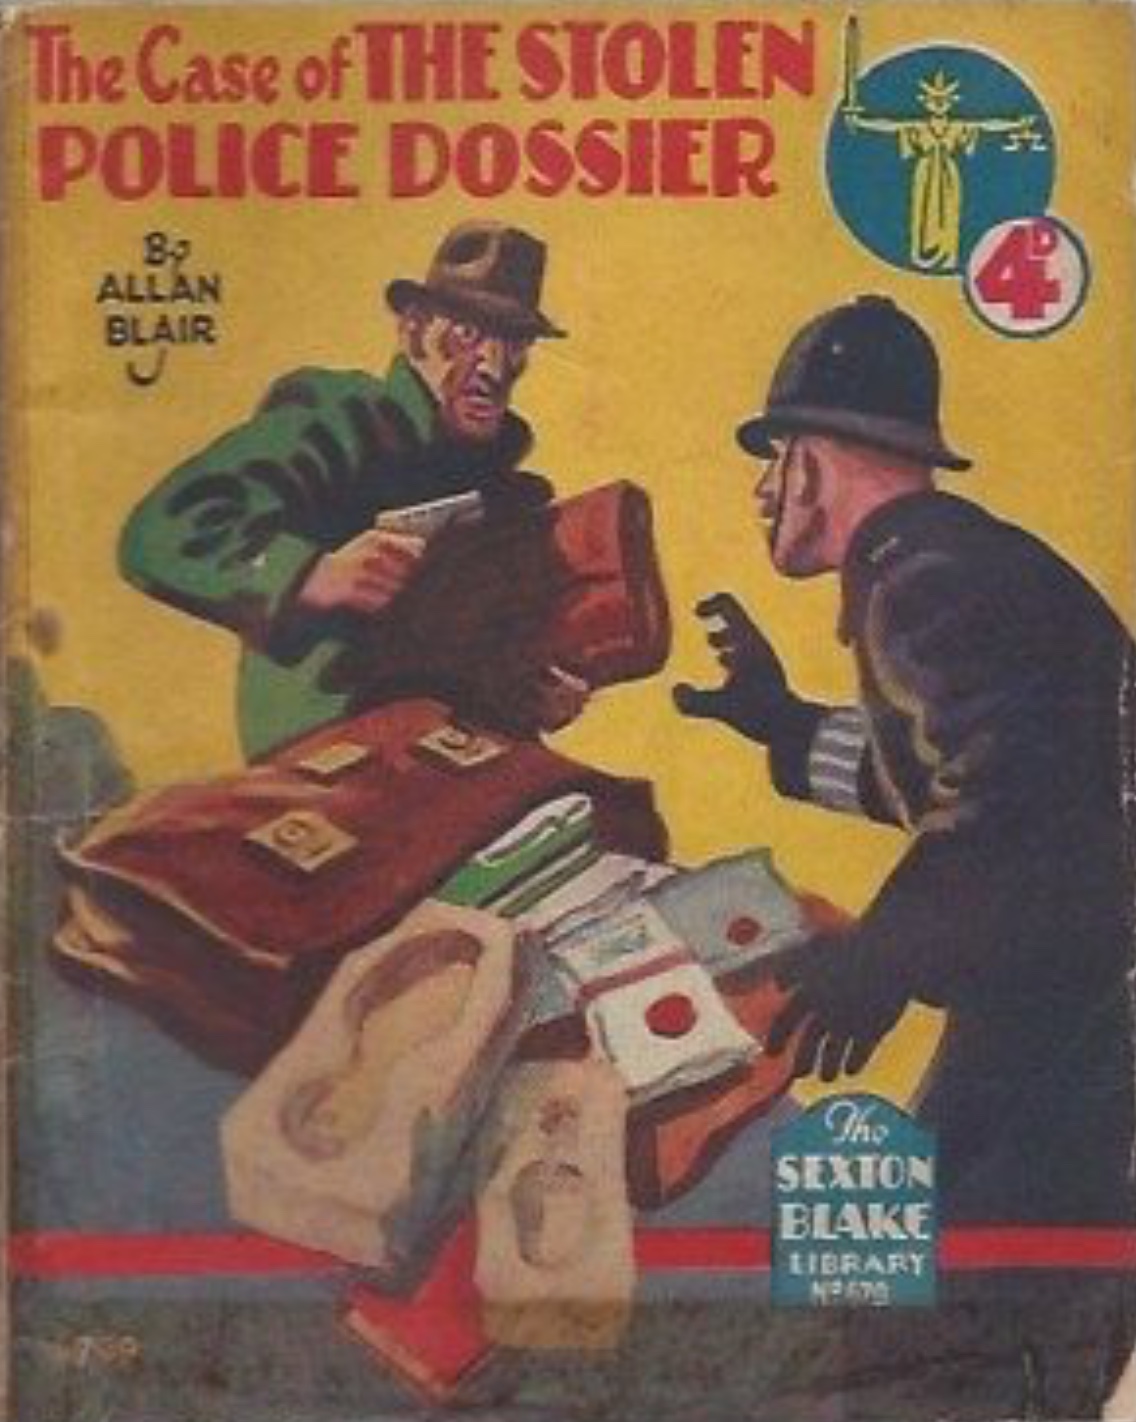 THE CASE OF THE STOLEN POLICE DOSSIER